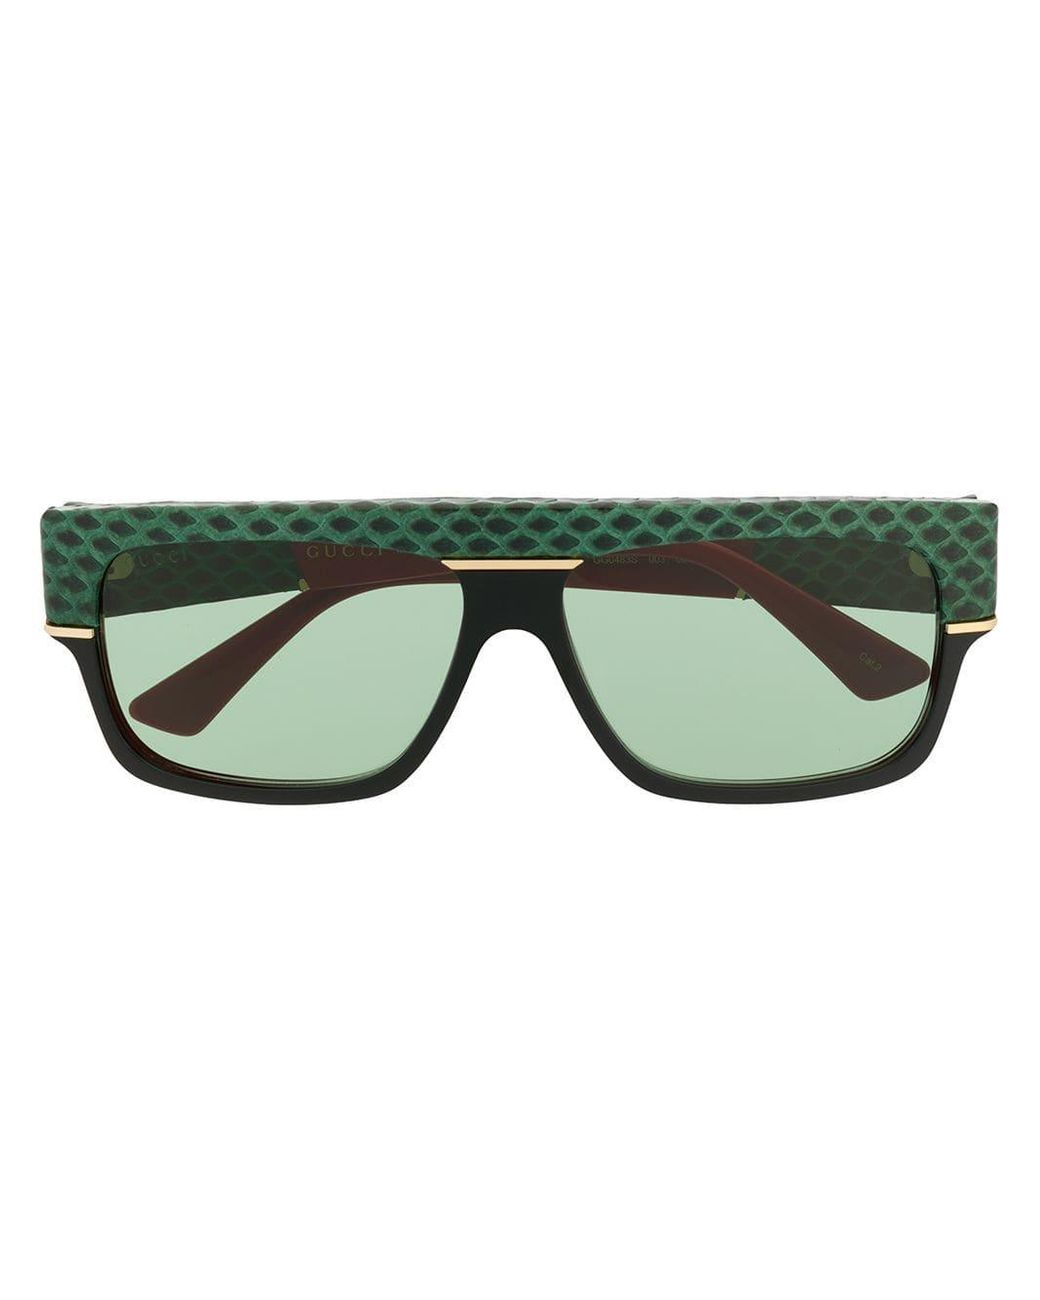 Gucci Snake Skin Detail Sunglasses in Green | Lyst